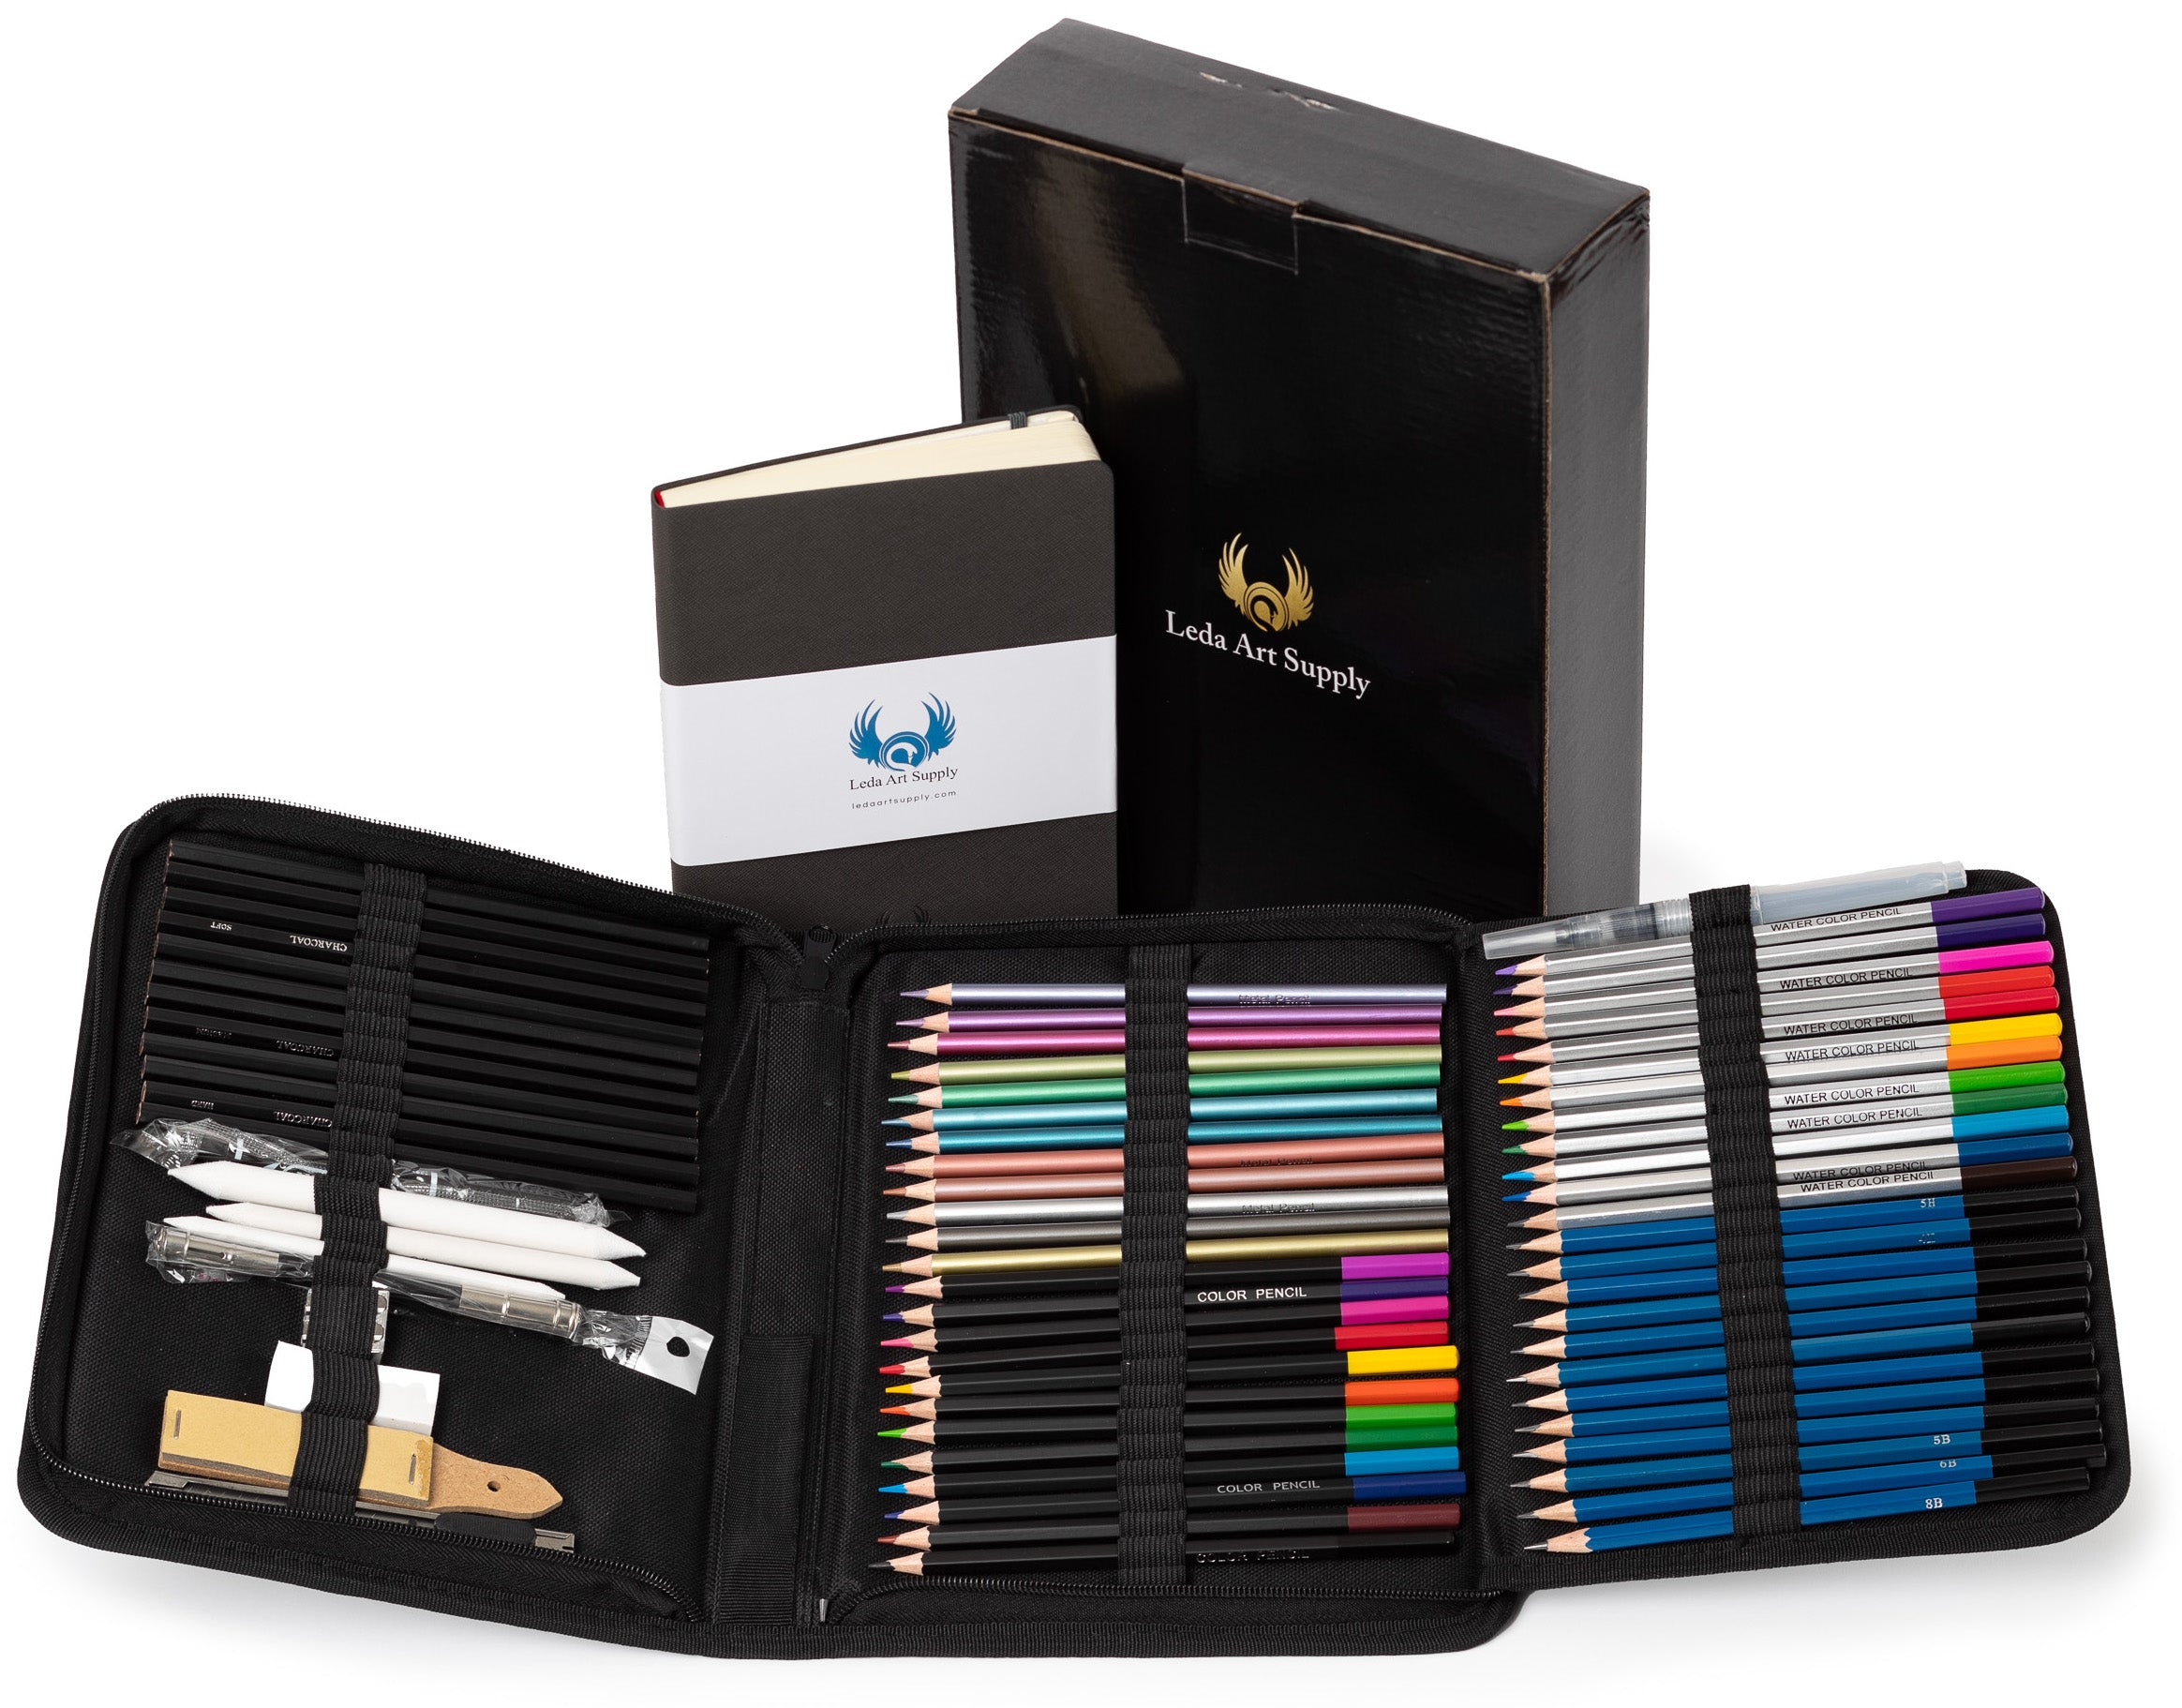 72 Piece Dream Art Kit for Colored Pencil Drawing Includes 60 Professional Sketch Pencils, Sketchbook and Tools